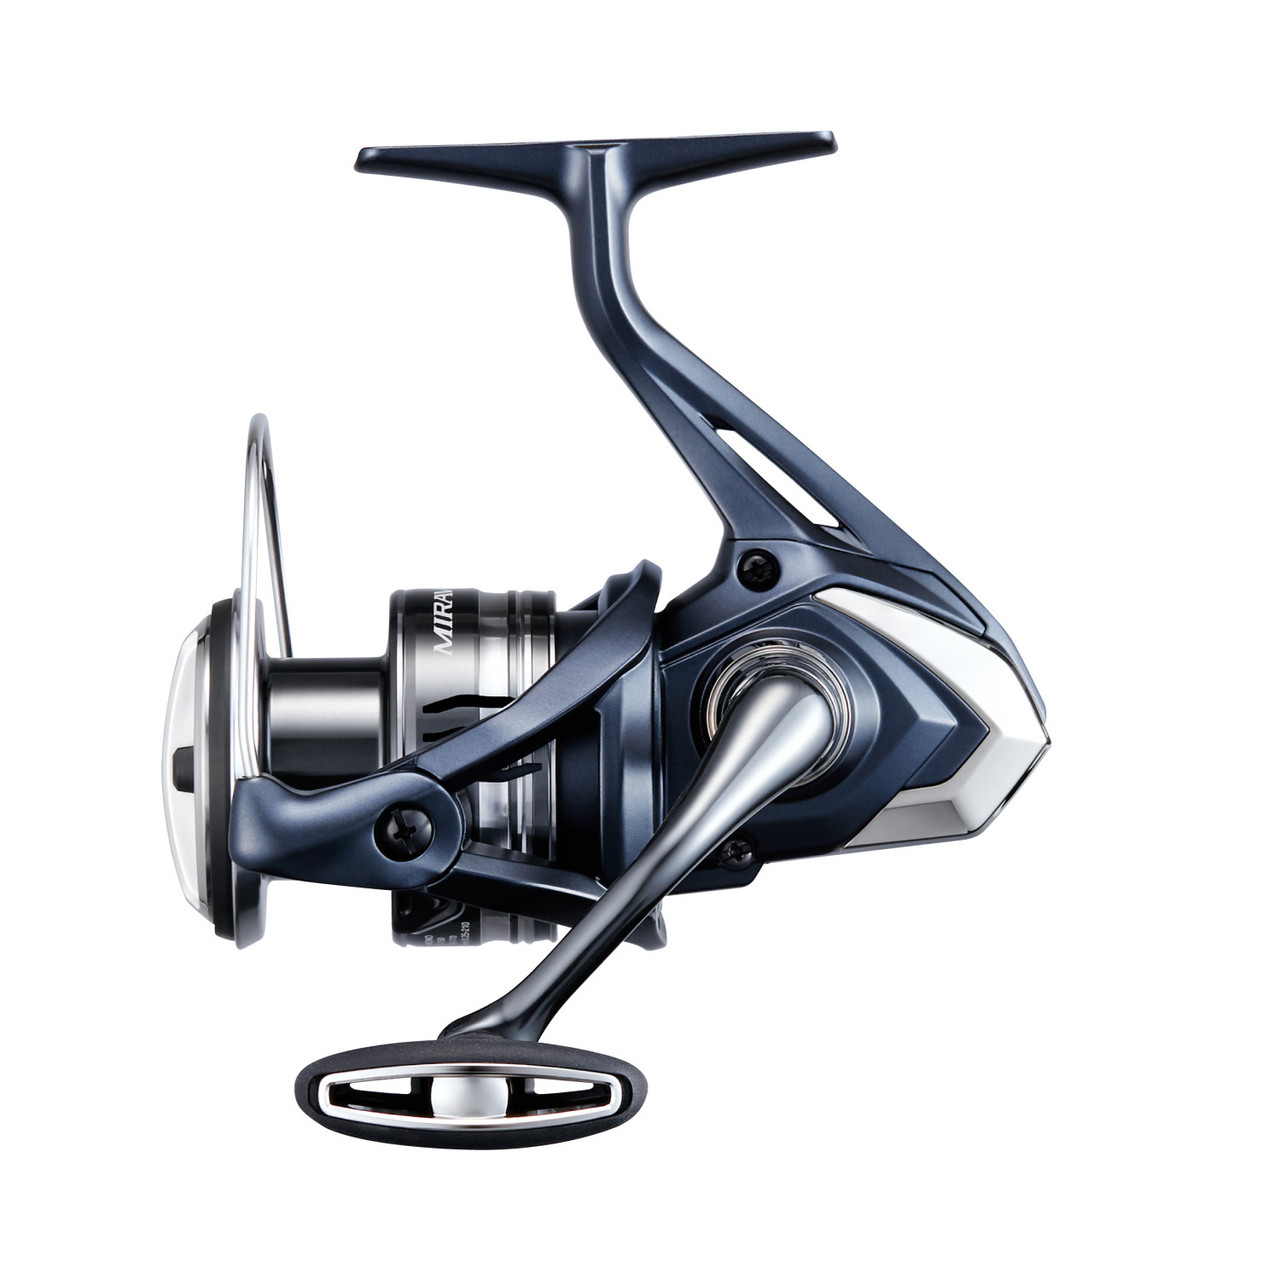  Mifine Chatoyant Dual Brake Spinning Reel Powerful 30lbs Max  Drag Aluminum Spool 5.2:1 3000-6000 Rubber Handle Grips Saltwater : Sports  & Outdoors